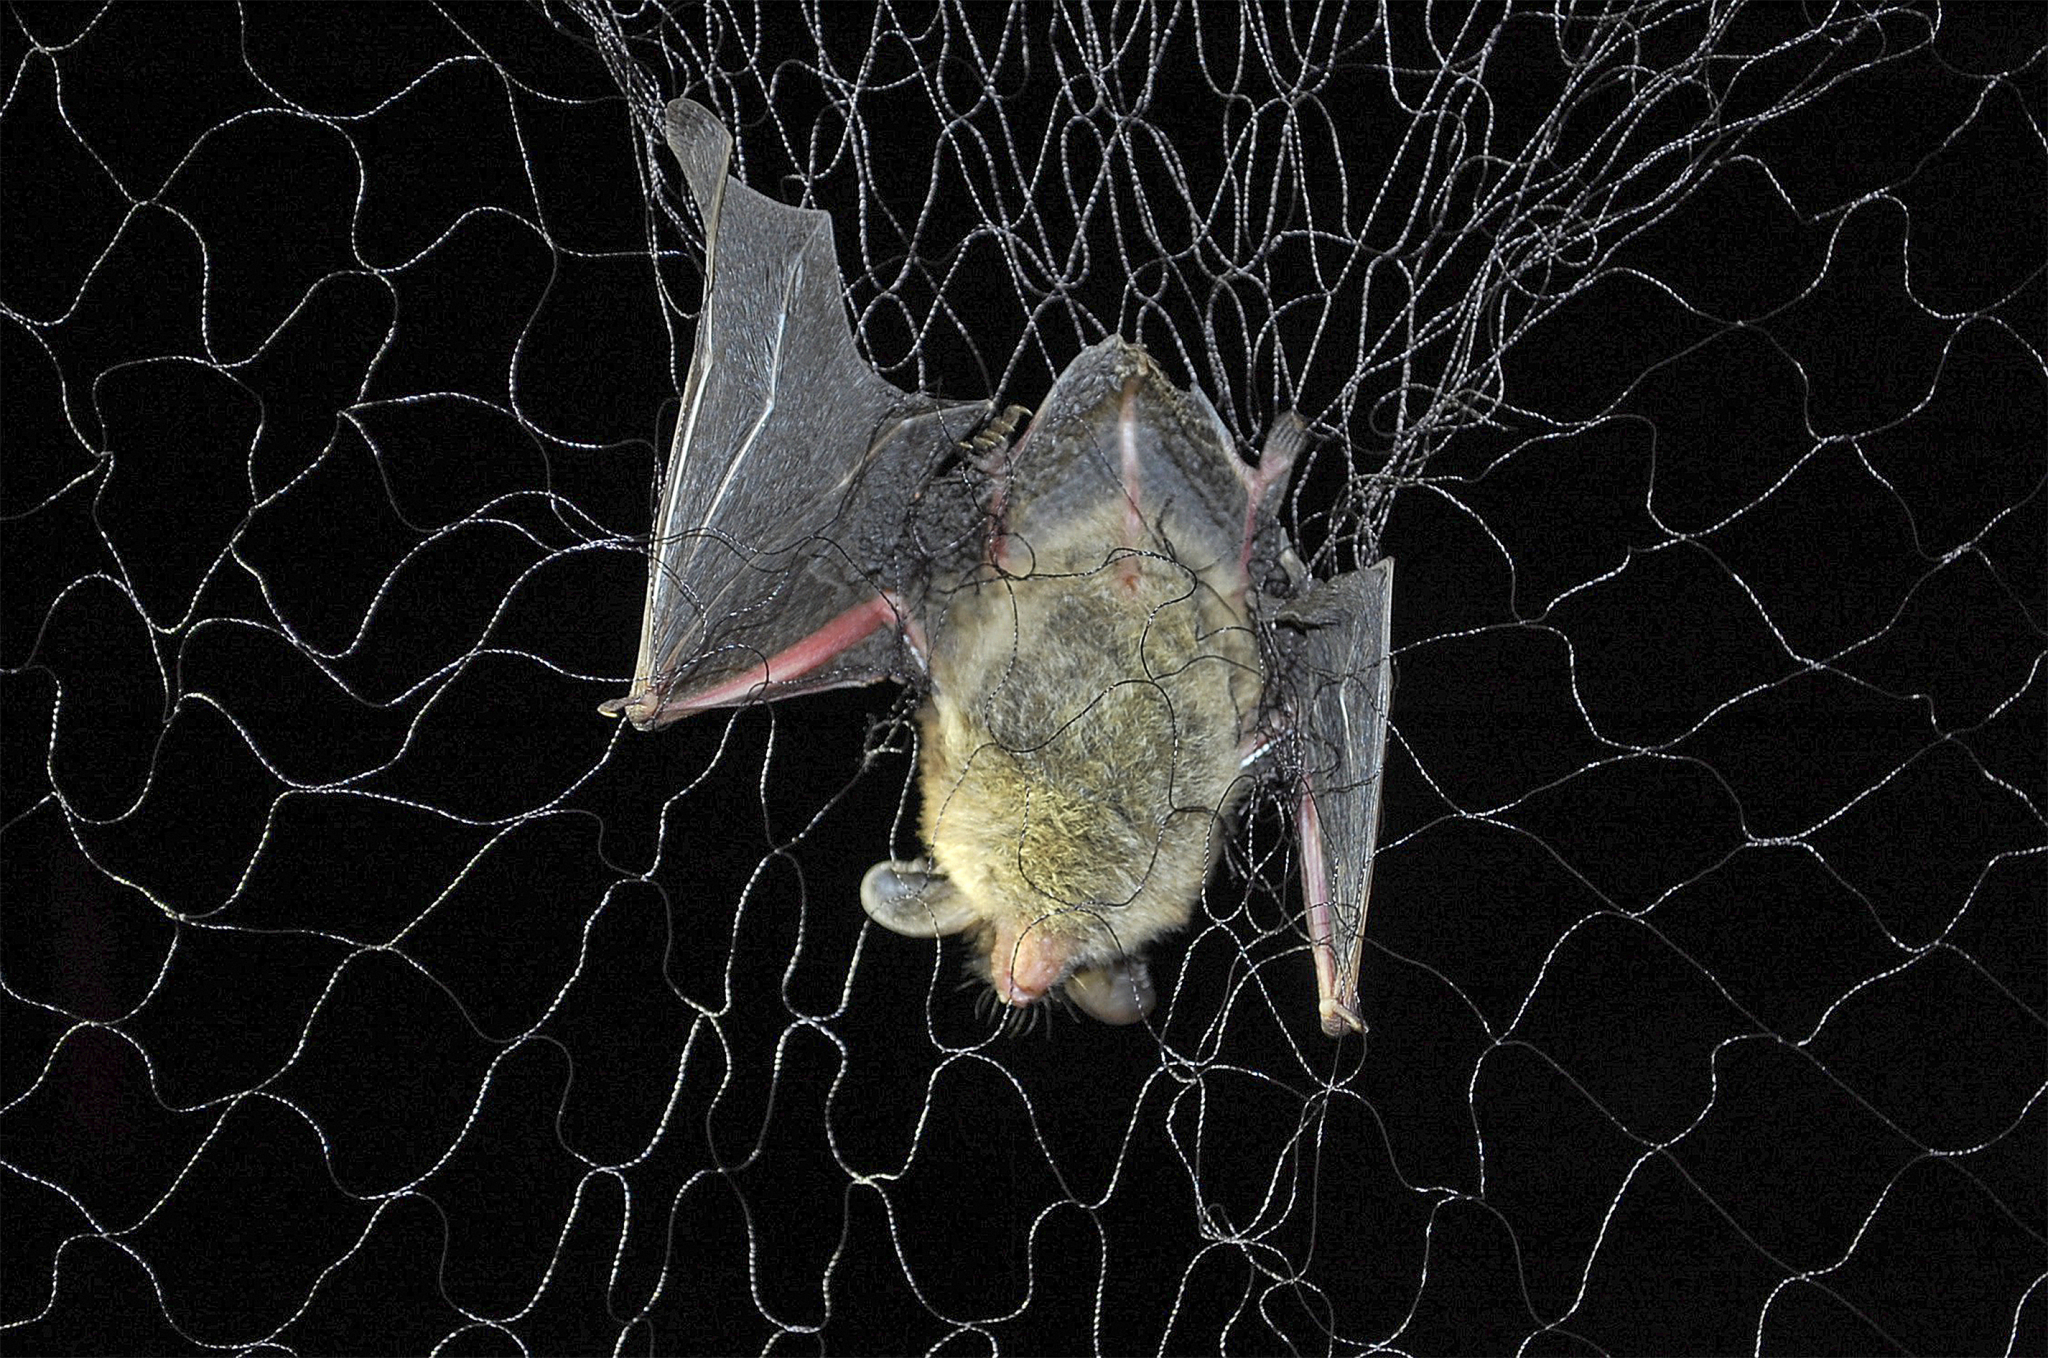 A deadly fungus is killing millions of bats in the US. Now it’s in